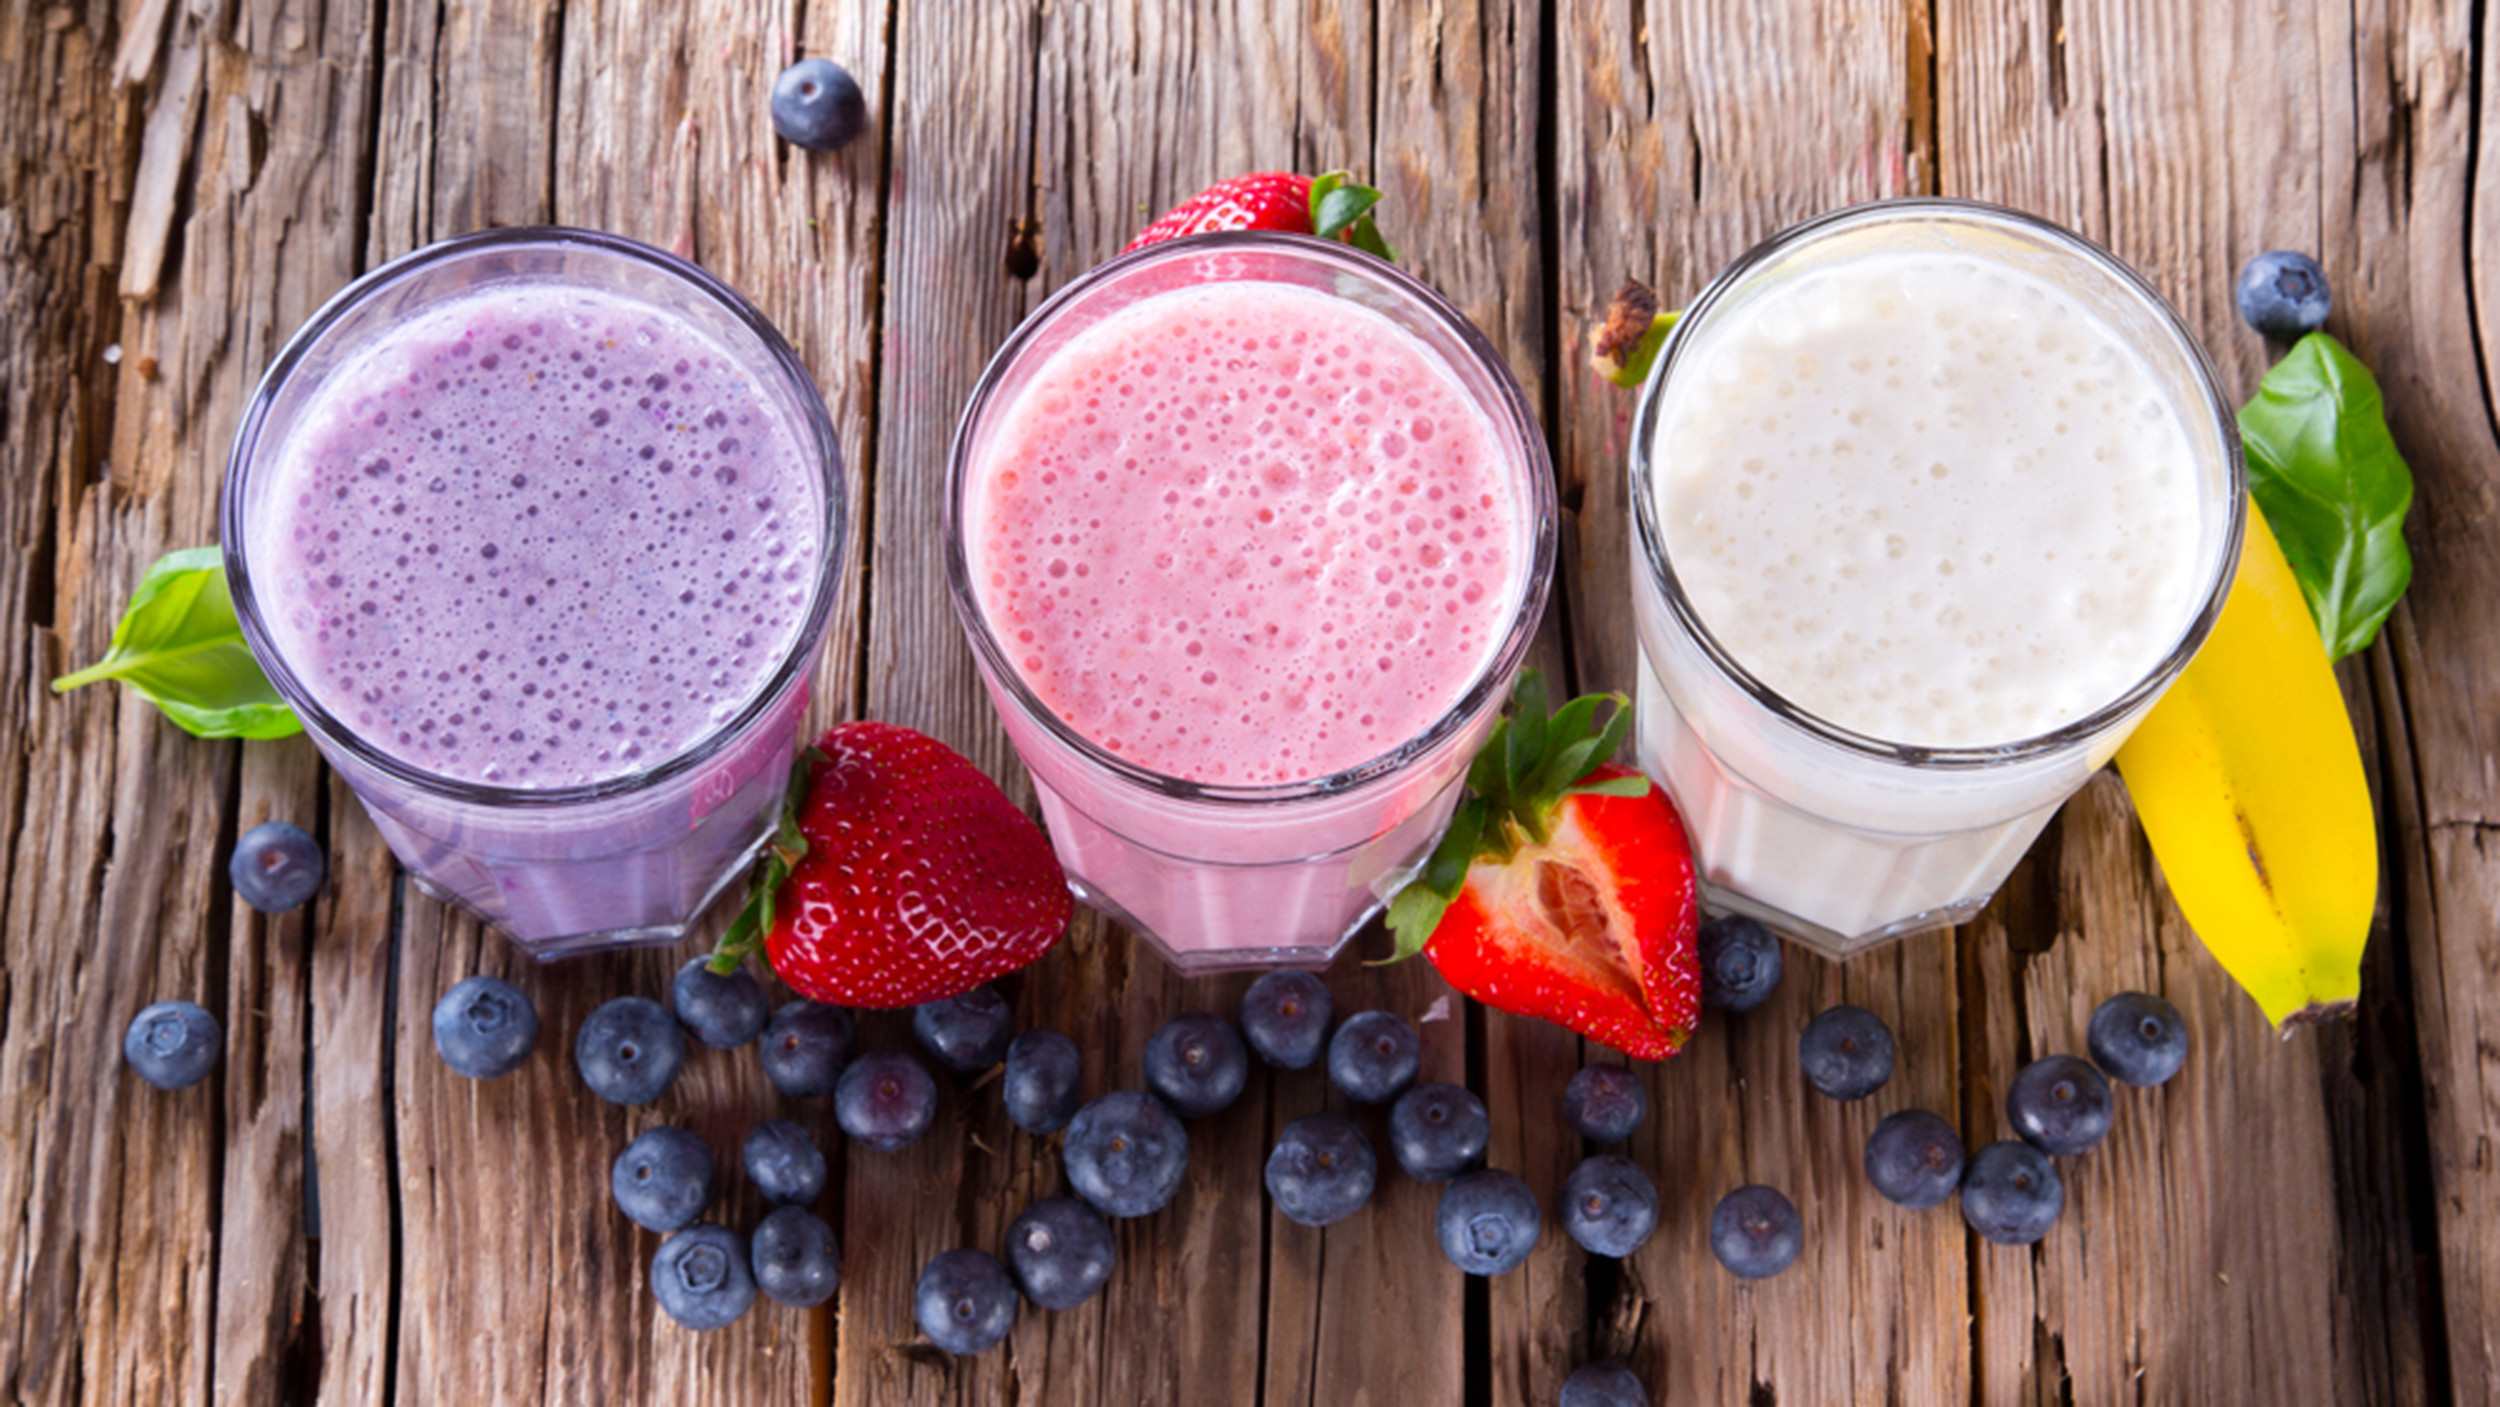 Healthy Smoothies At Home
 Super breakfast smoothies help make back to school a